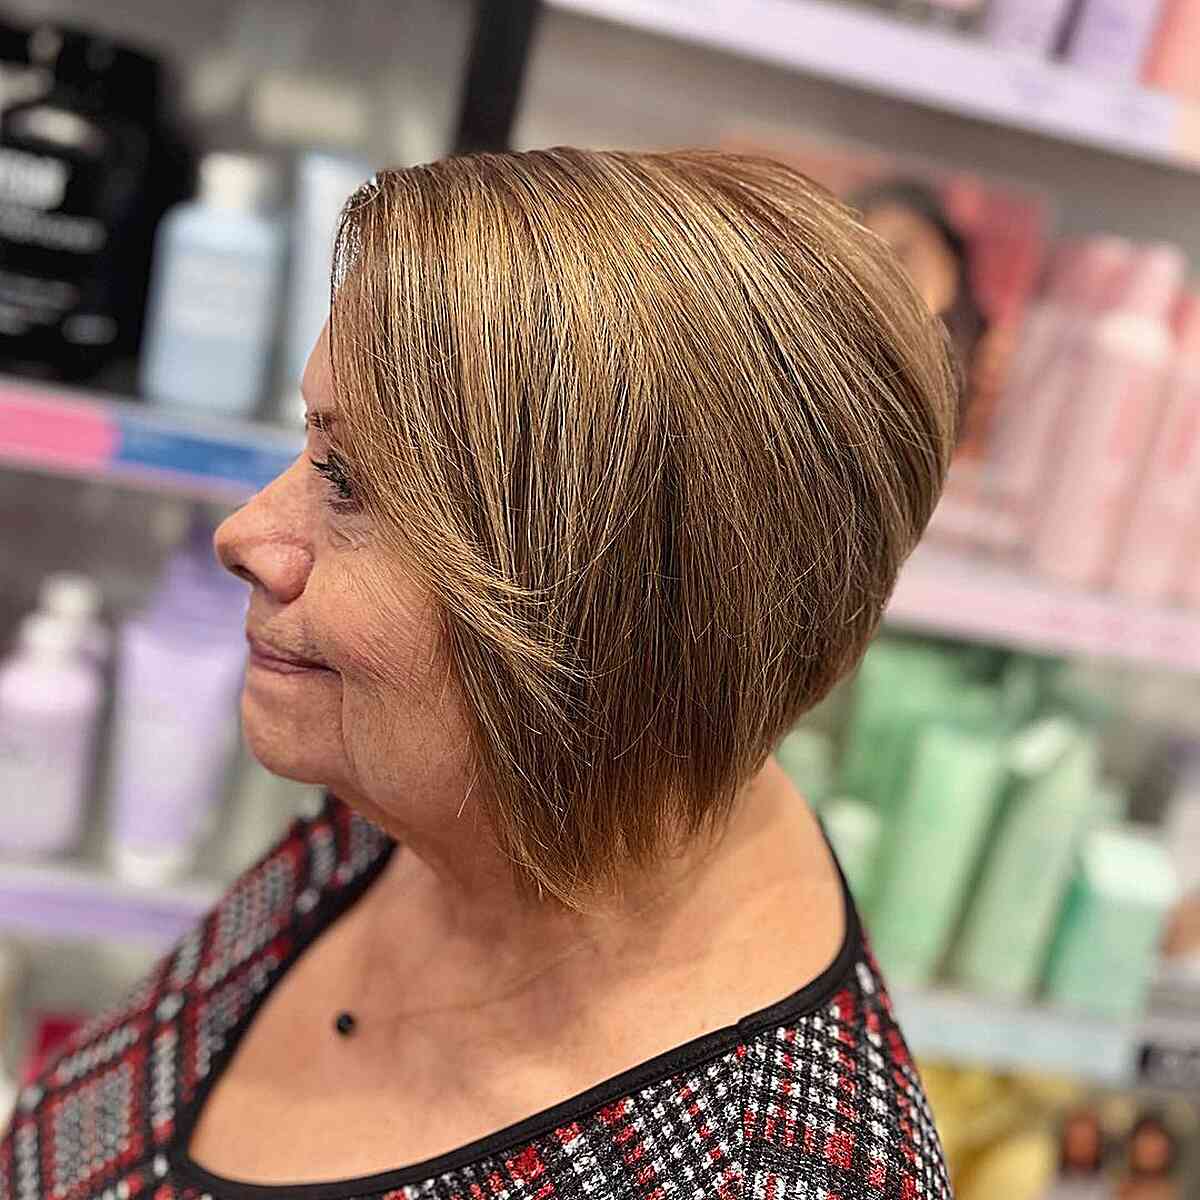 Fall-Inspired Honey Blonde with Root Retouch for Older Ladies Aged 70